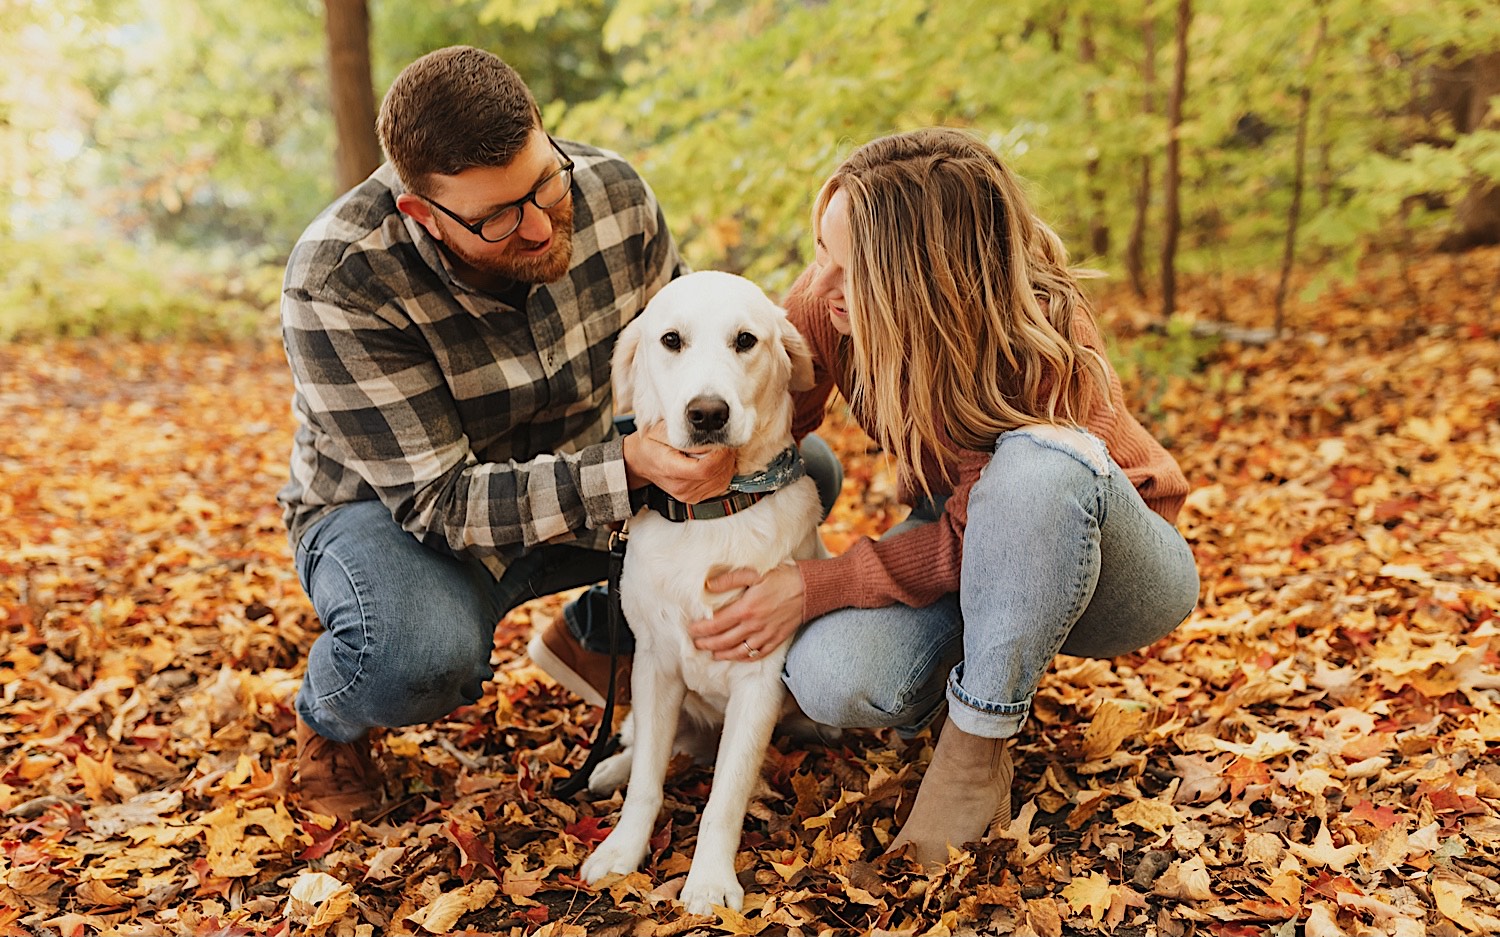 During their fall engagement session in Winona a couple squat down next to their dog who's sitting in between them and look at him while he looks at the camera, the ground is covered in leaves and trees are behind them 